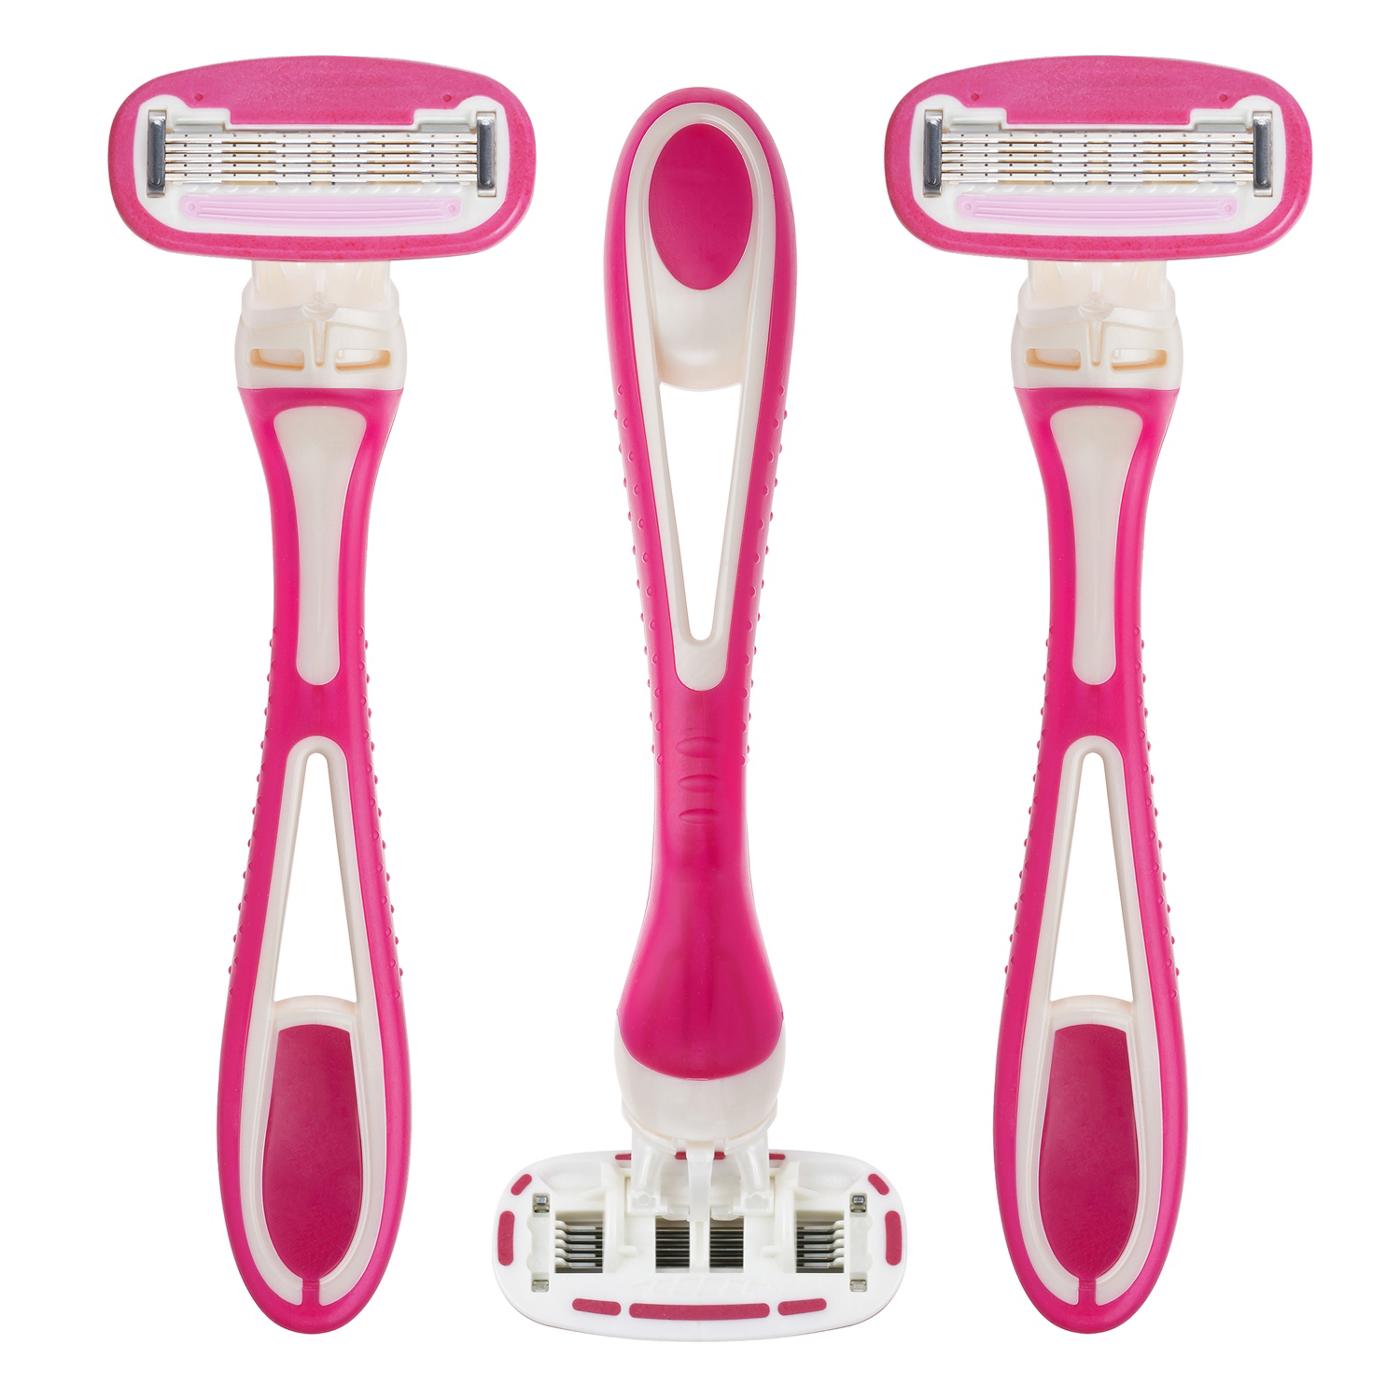 Hill Country Essentials Simply Silky 5 Blade Women's Disposable Razors; image 6 of 6